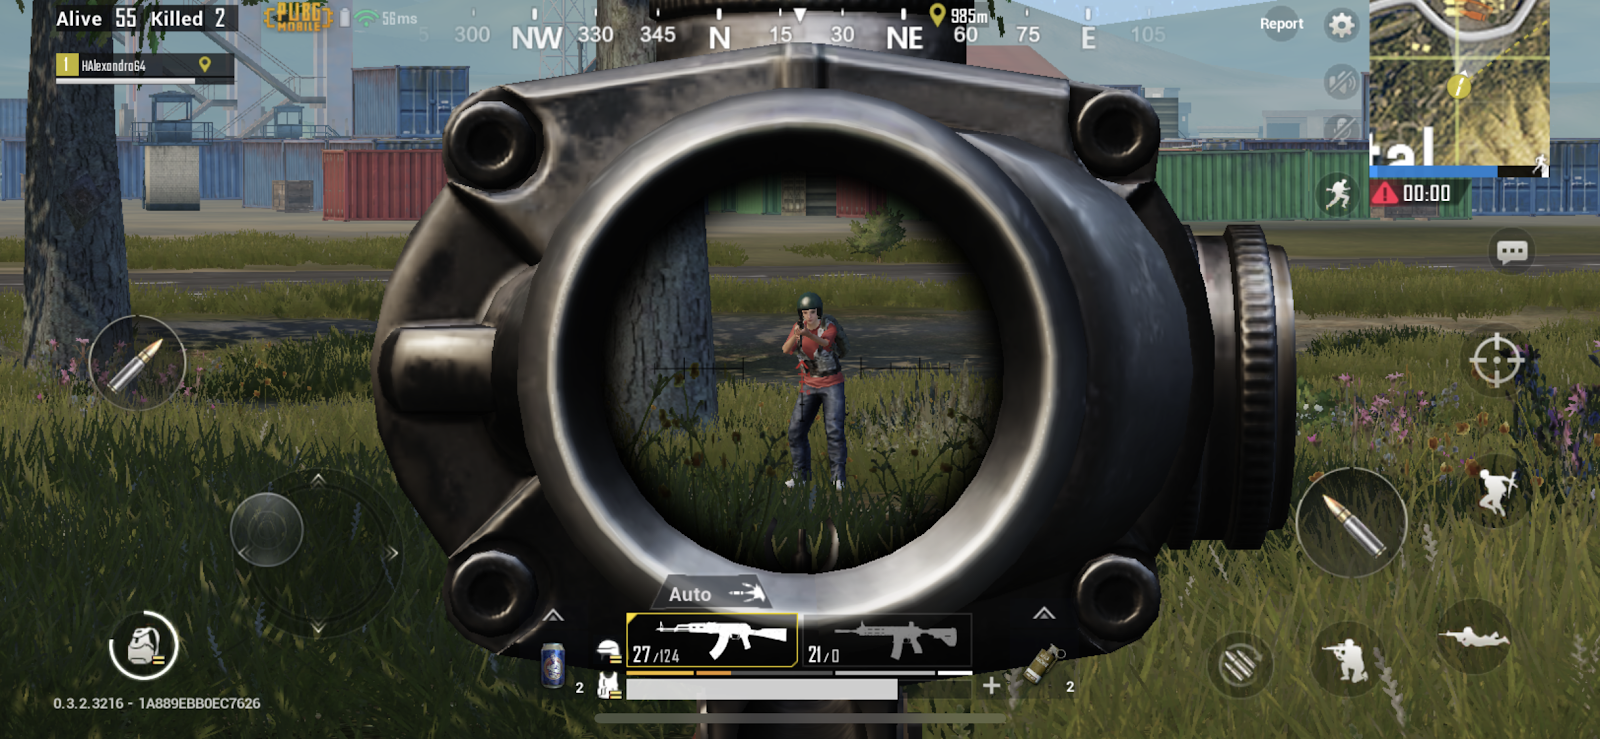 6 Things PUBG Mobile Does Better Than The Original